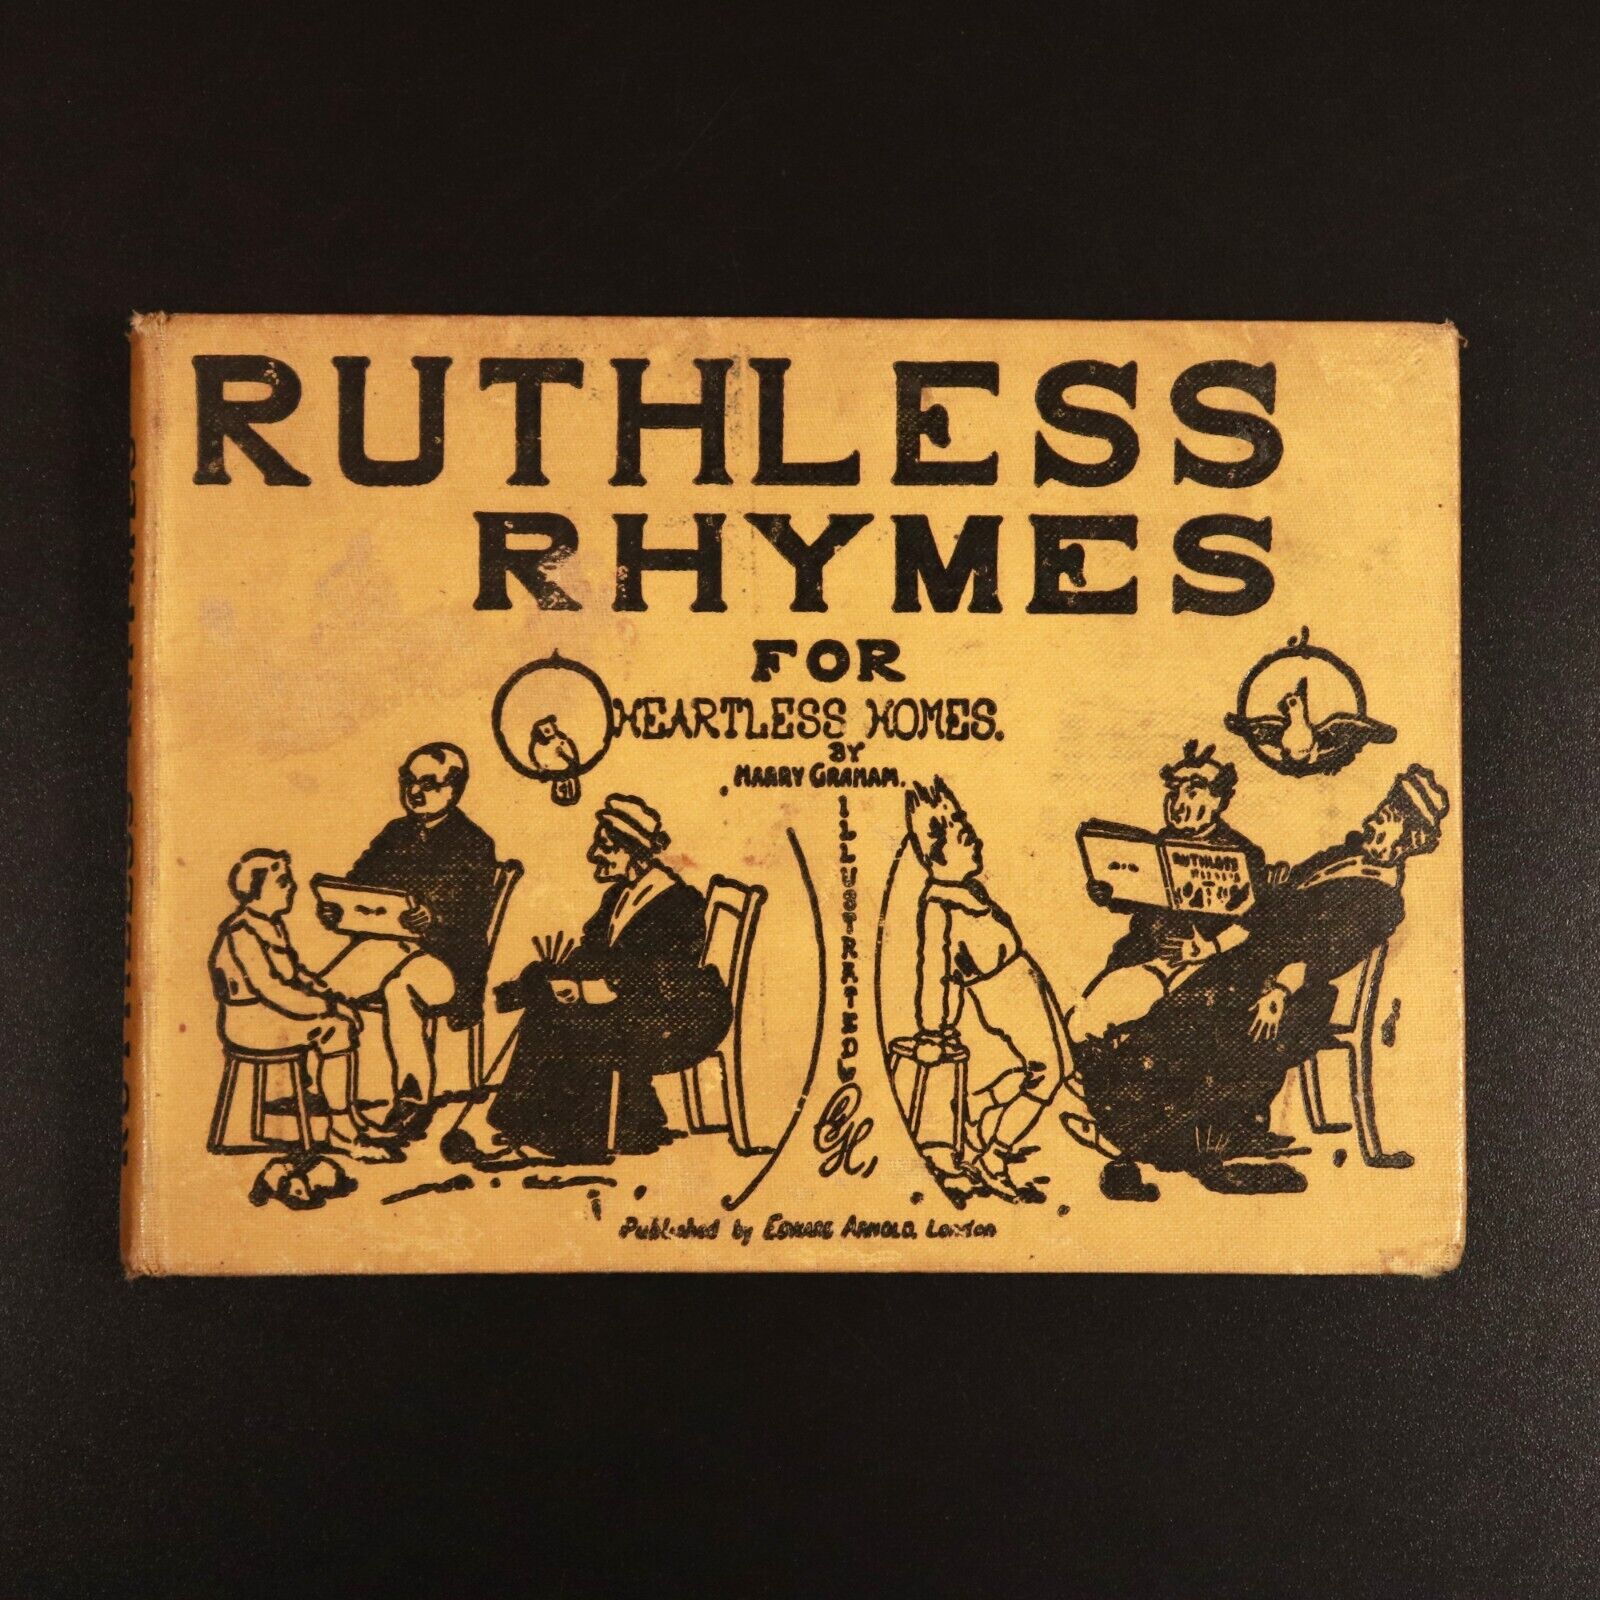 c1924 Ruthless Rhymes For Heartless Homes by Harry Graham Antique Poetry Book